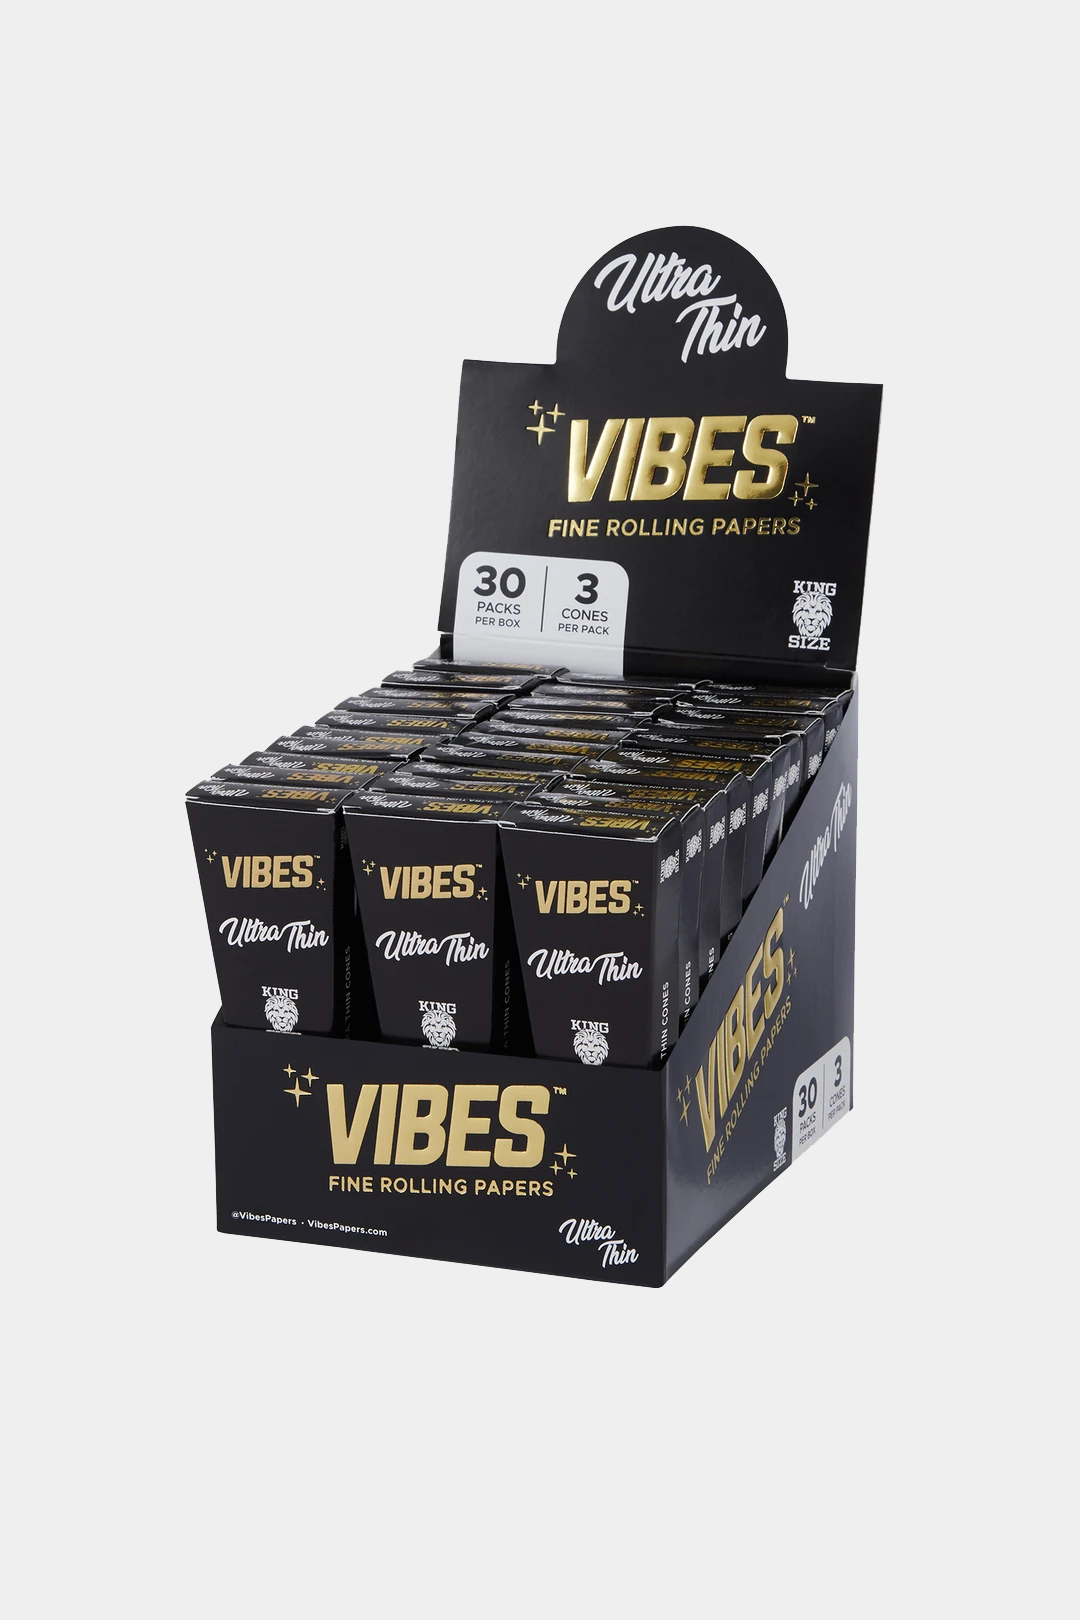 Vibes - Ultra Thin King Size Cone 3pk -40CT Display